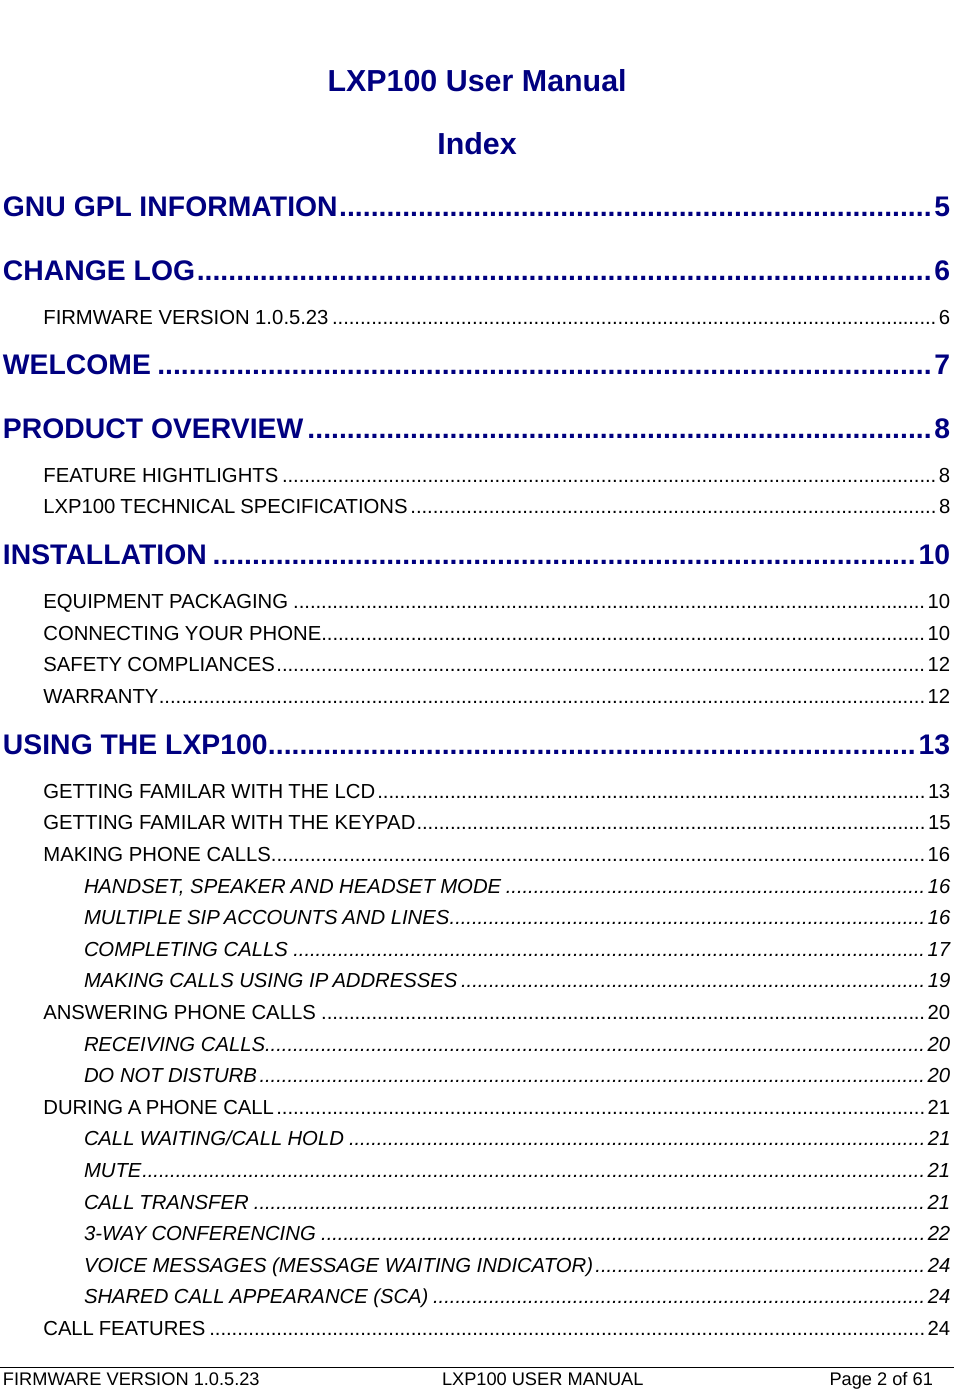   FIRMWARE VERSION 1.0.5.23                    LXP100 USER MANUAL                  Page 2 of 61                                   LXP100 User Manual Index GNU GPL INFORMATION...........................................................................5CHANGE LOG.............................................................................................6FIRMWARE VERSION 1.0.5.23 ............................................................................................................6WELCOME ..................................................................................................7PRODUCT OVERVIEW...............................................................................8FEATURE HIGHTLIGHTS .....................................................................................................................8LXP100 TECHNICAL SPECIFICATIONS..............................................................................................8INSTALLATION .........................................................................................10EQUIPMENT PACKAGING .................................................................................................................10CONNECTING YOUR PHONE............................................................................................................10SAFETY COMPLIANCES....................................................................................................................12WARRANTY.........................................................................................................................................12USING THE LXP100..................................................................................13GETTING FAMILAR WITH THE LCD..................................................................................................13GETTING FAMILAR WITH THE KEYPAD...........................................................................................15MAKING PHONE CALLS.....................................................................................................................16HANDSET, SPEAKER AND HEADSET MODE ...........................................................................16MULTIPLE SIP ACCOUNTS AND LINES.....................................................................................16COMPLETING CALLS .................................................................................................................17MAKING CALLS USING IP ADDRESSES ...................................................................................19ANSWERING PHONE CALLS ............................................................................................................20RECEIVING CALLS......................................................................................................................20DO NOT DISTURB.......................................................................................................................20DURING A PHONE CALL....................................................................................................................21CALL WAITING/CALL HOLD .......................................................................................................21MUTE............................................................................................................................................21CALL TRANSFER ........................................................................................................................213-WAY CONFERENCING ............................................................................................................22VOICE MESSAGES (MESSAGE WAITING INDICATOR)...........................................................24SHARED CALL APPEARANCE (SCA) ........................................................................................24CALL FEATURES ................................................................................................................................24